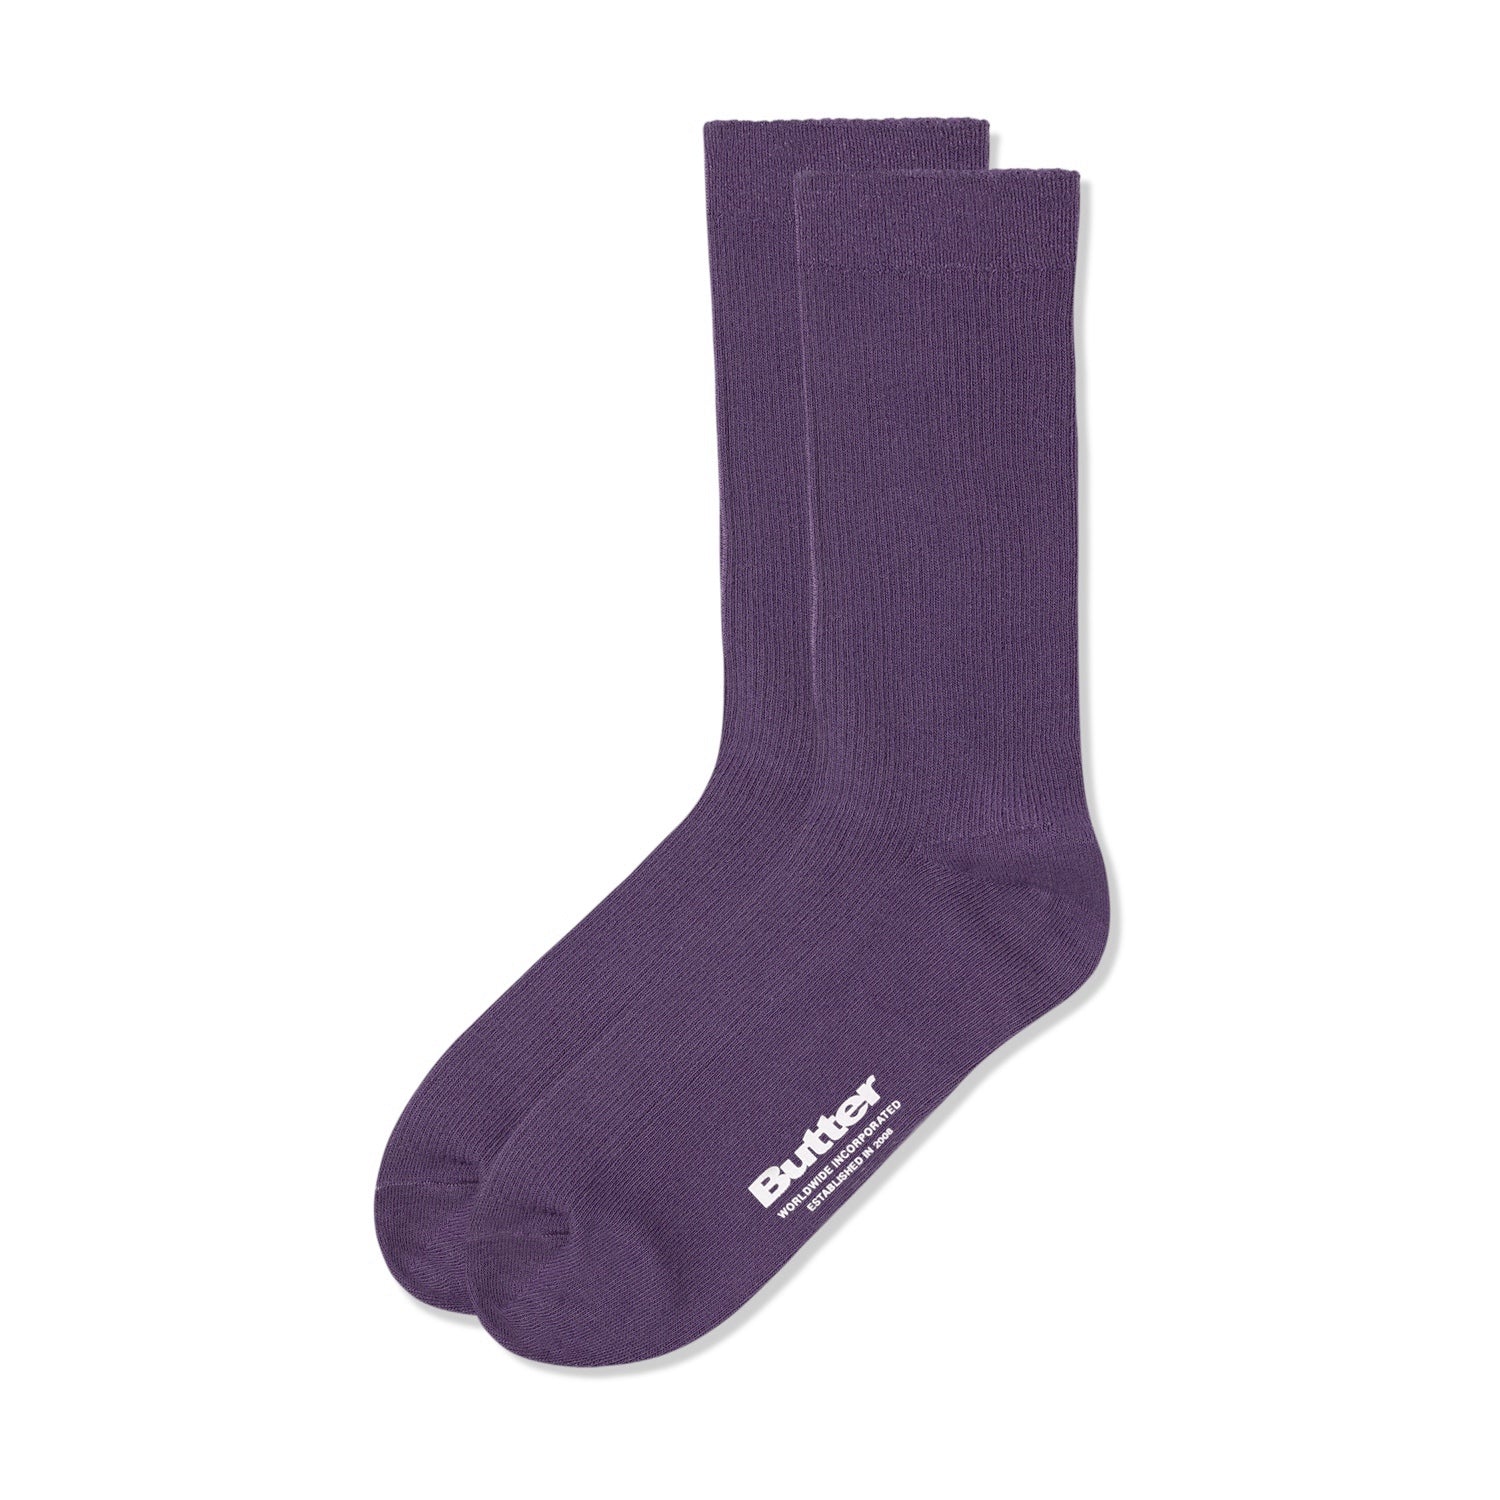 Pigment Dye Socks, Washed Mulberry